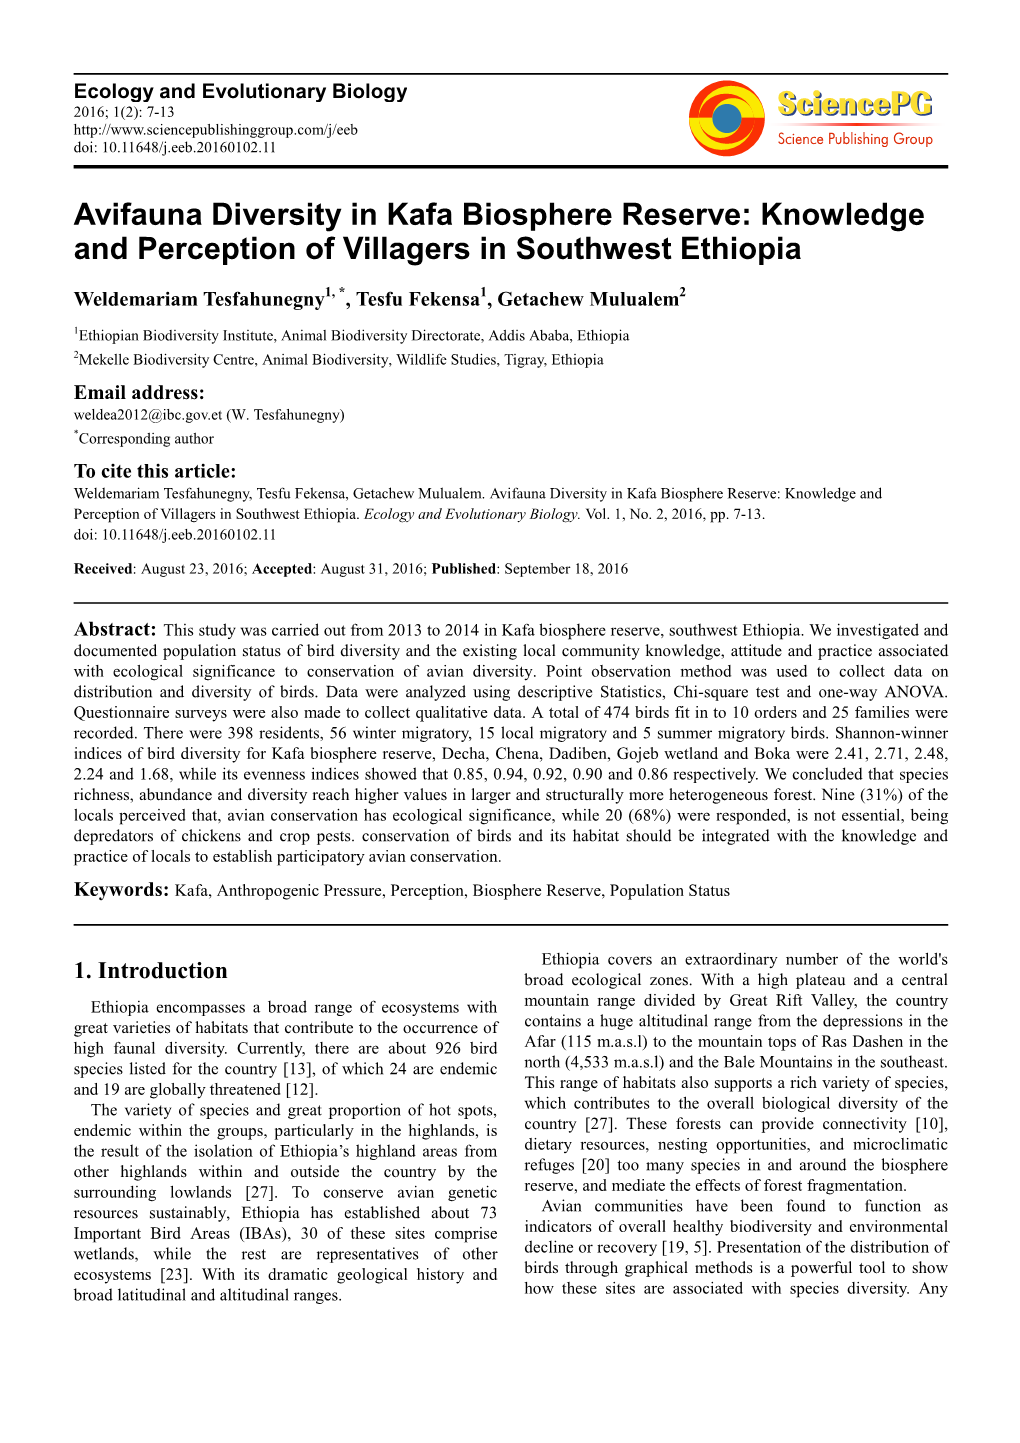 Avifauna Diversity in Kafa Biosphere Reserve: Knowledge and Perception of Villagers in Southwest Ethiopia